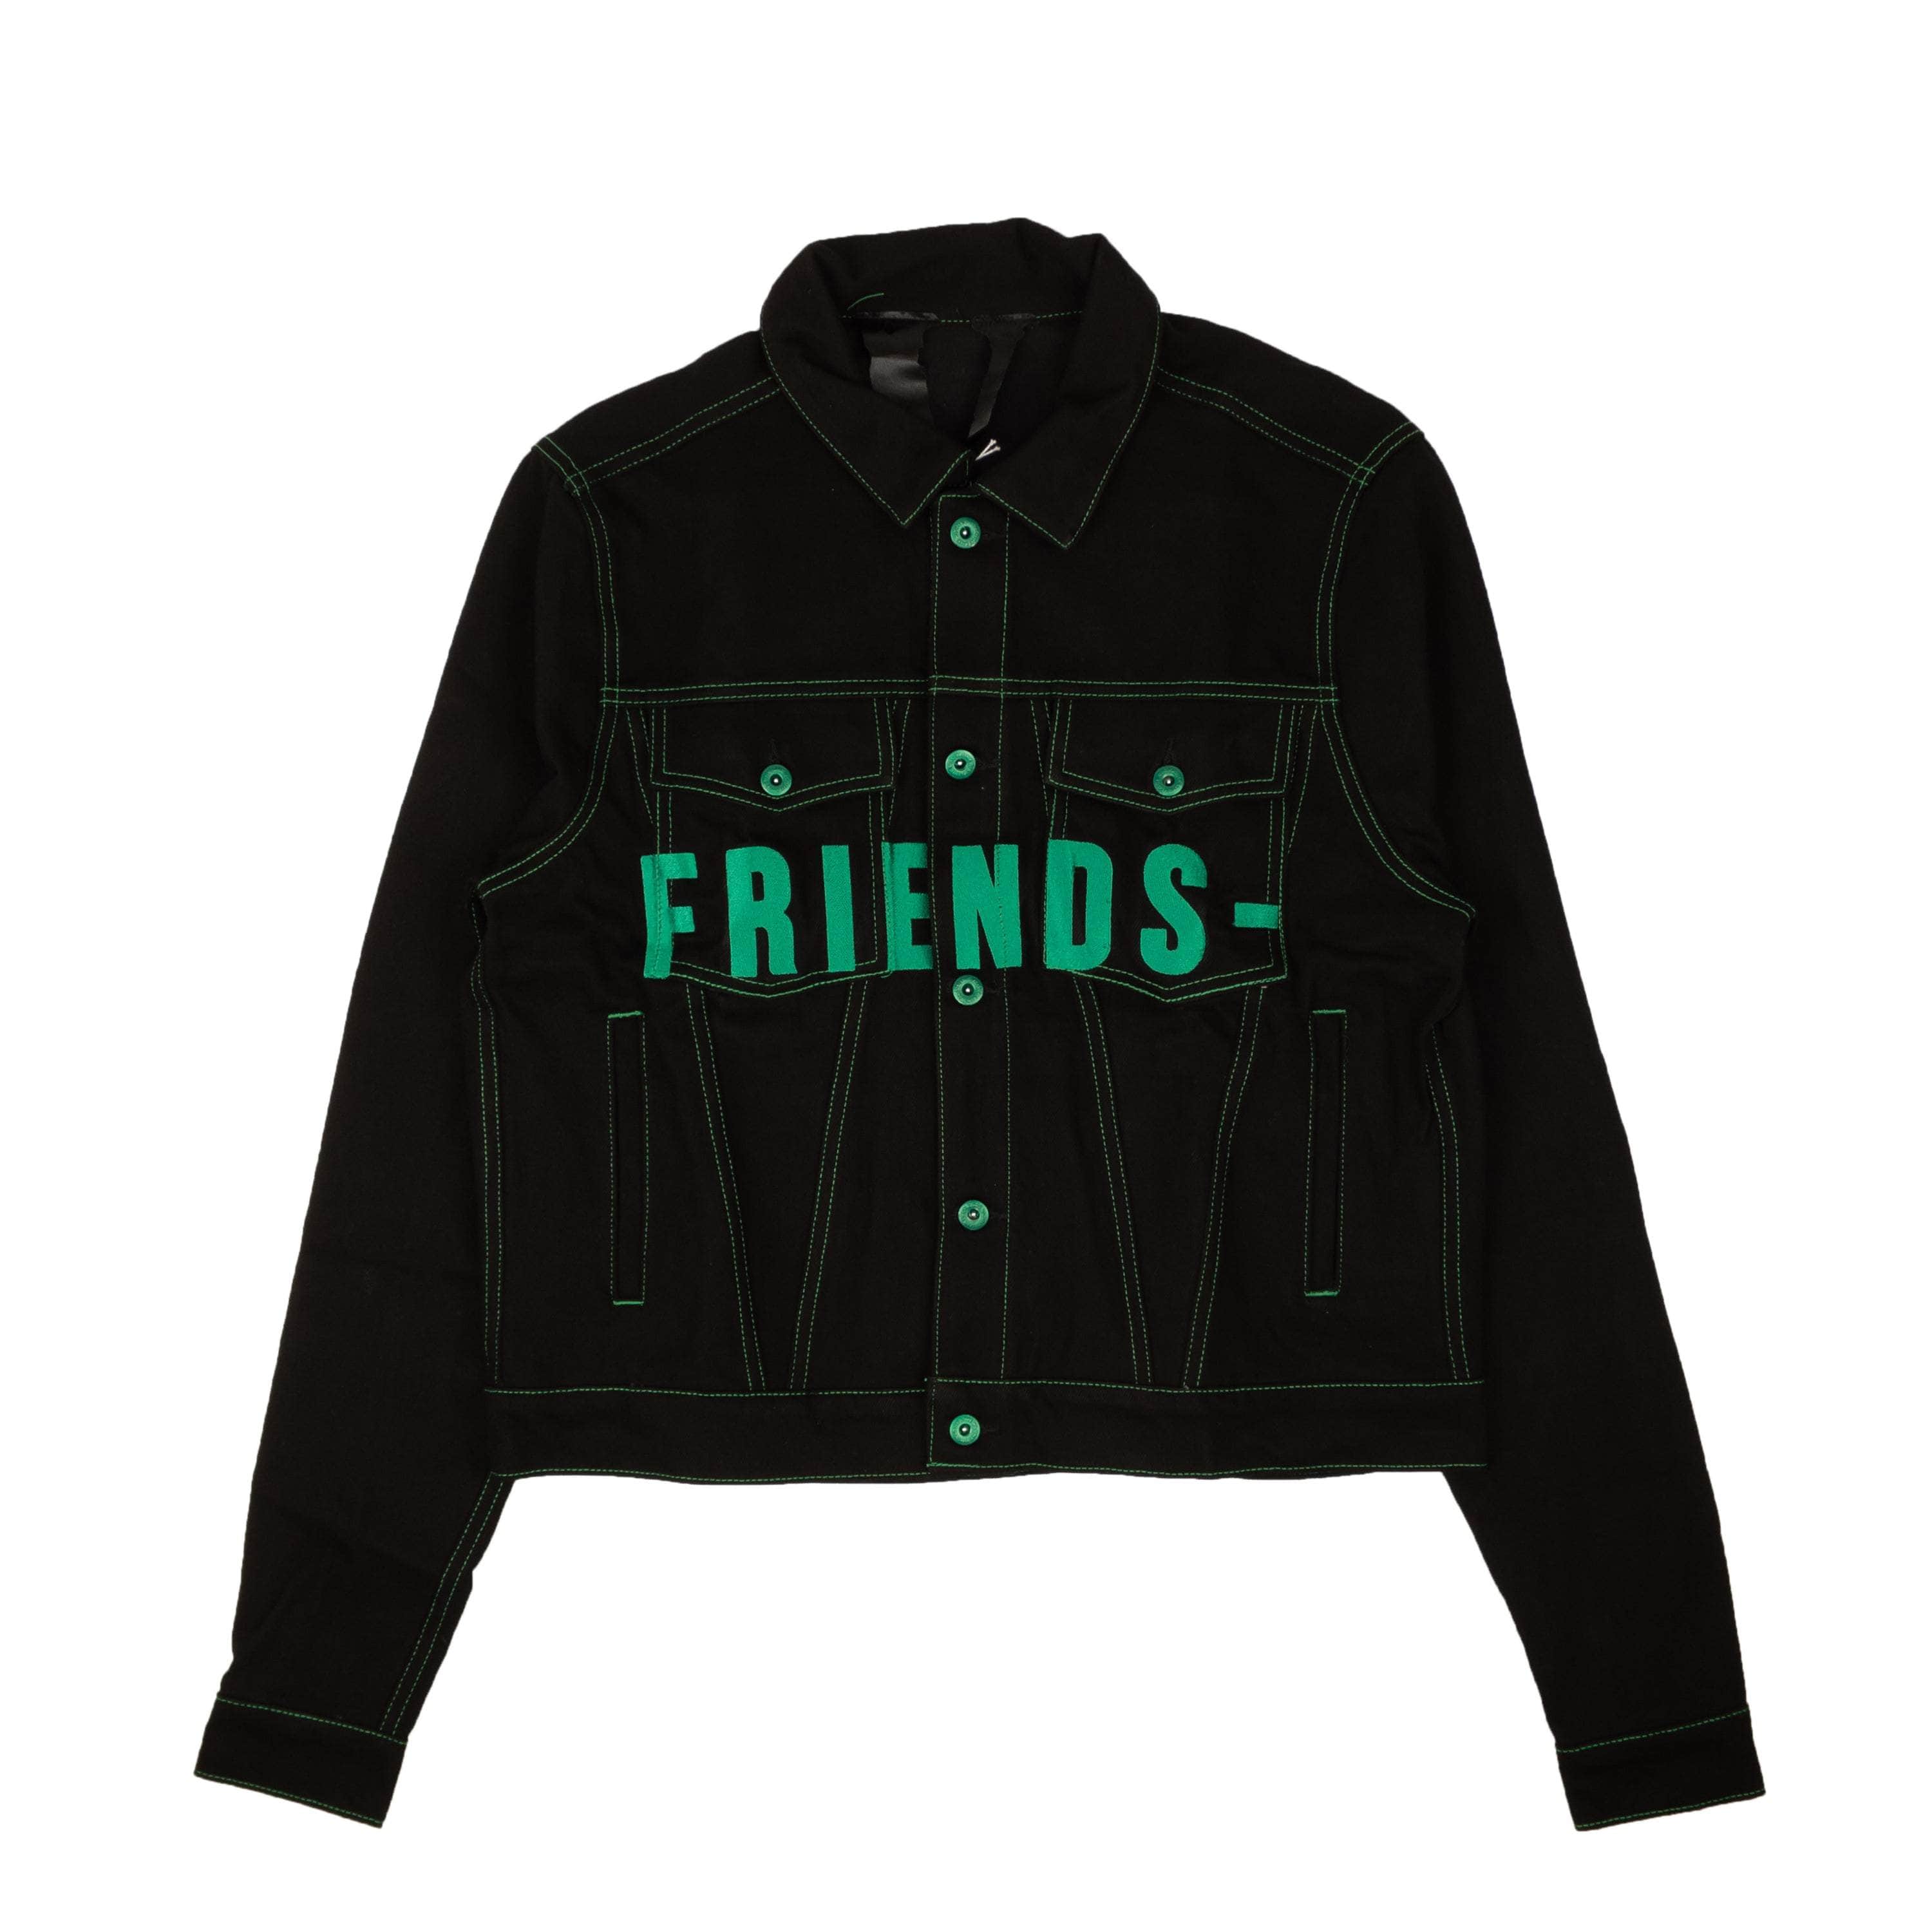 Vlone 750-1000, channelenable-all, chicmi, couponcollection, gender-mens, main-clothing, mens-denim-jackets, mens-shoes, size-l, size-m, size-xl, size-xxl, vlone Black And Green Friends Denim Jacket